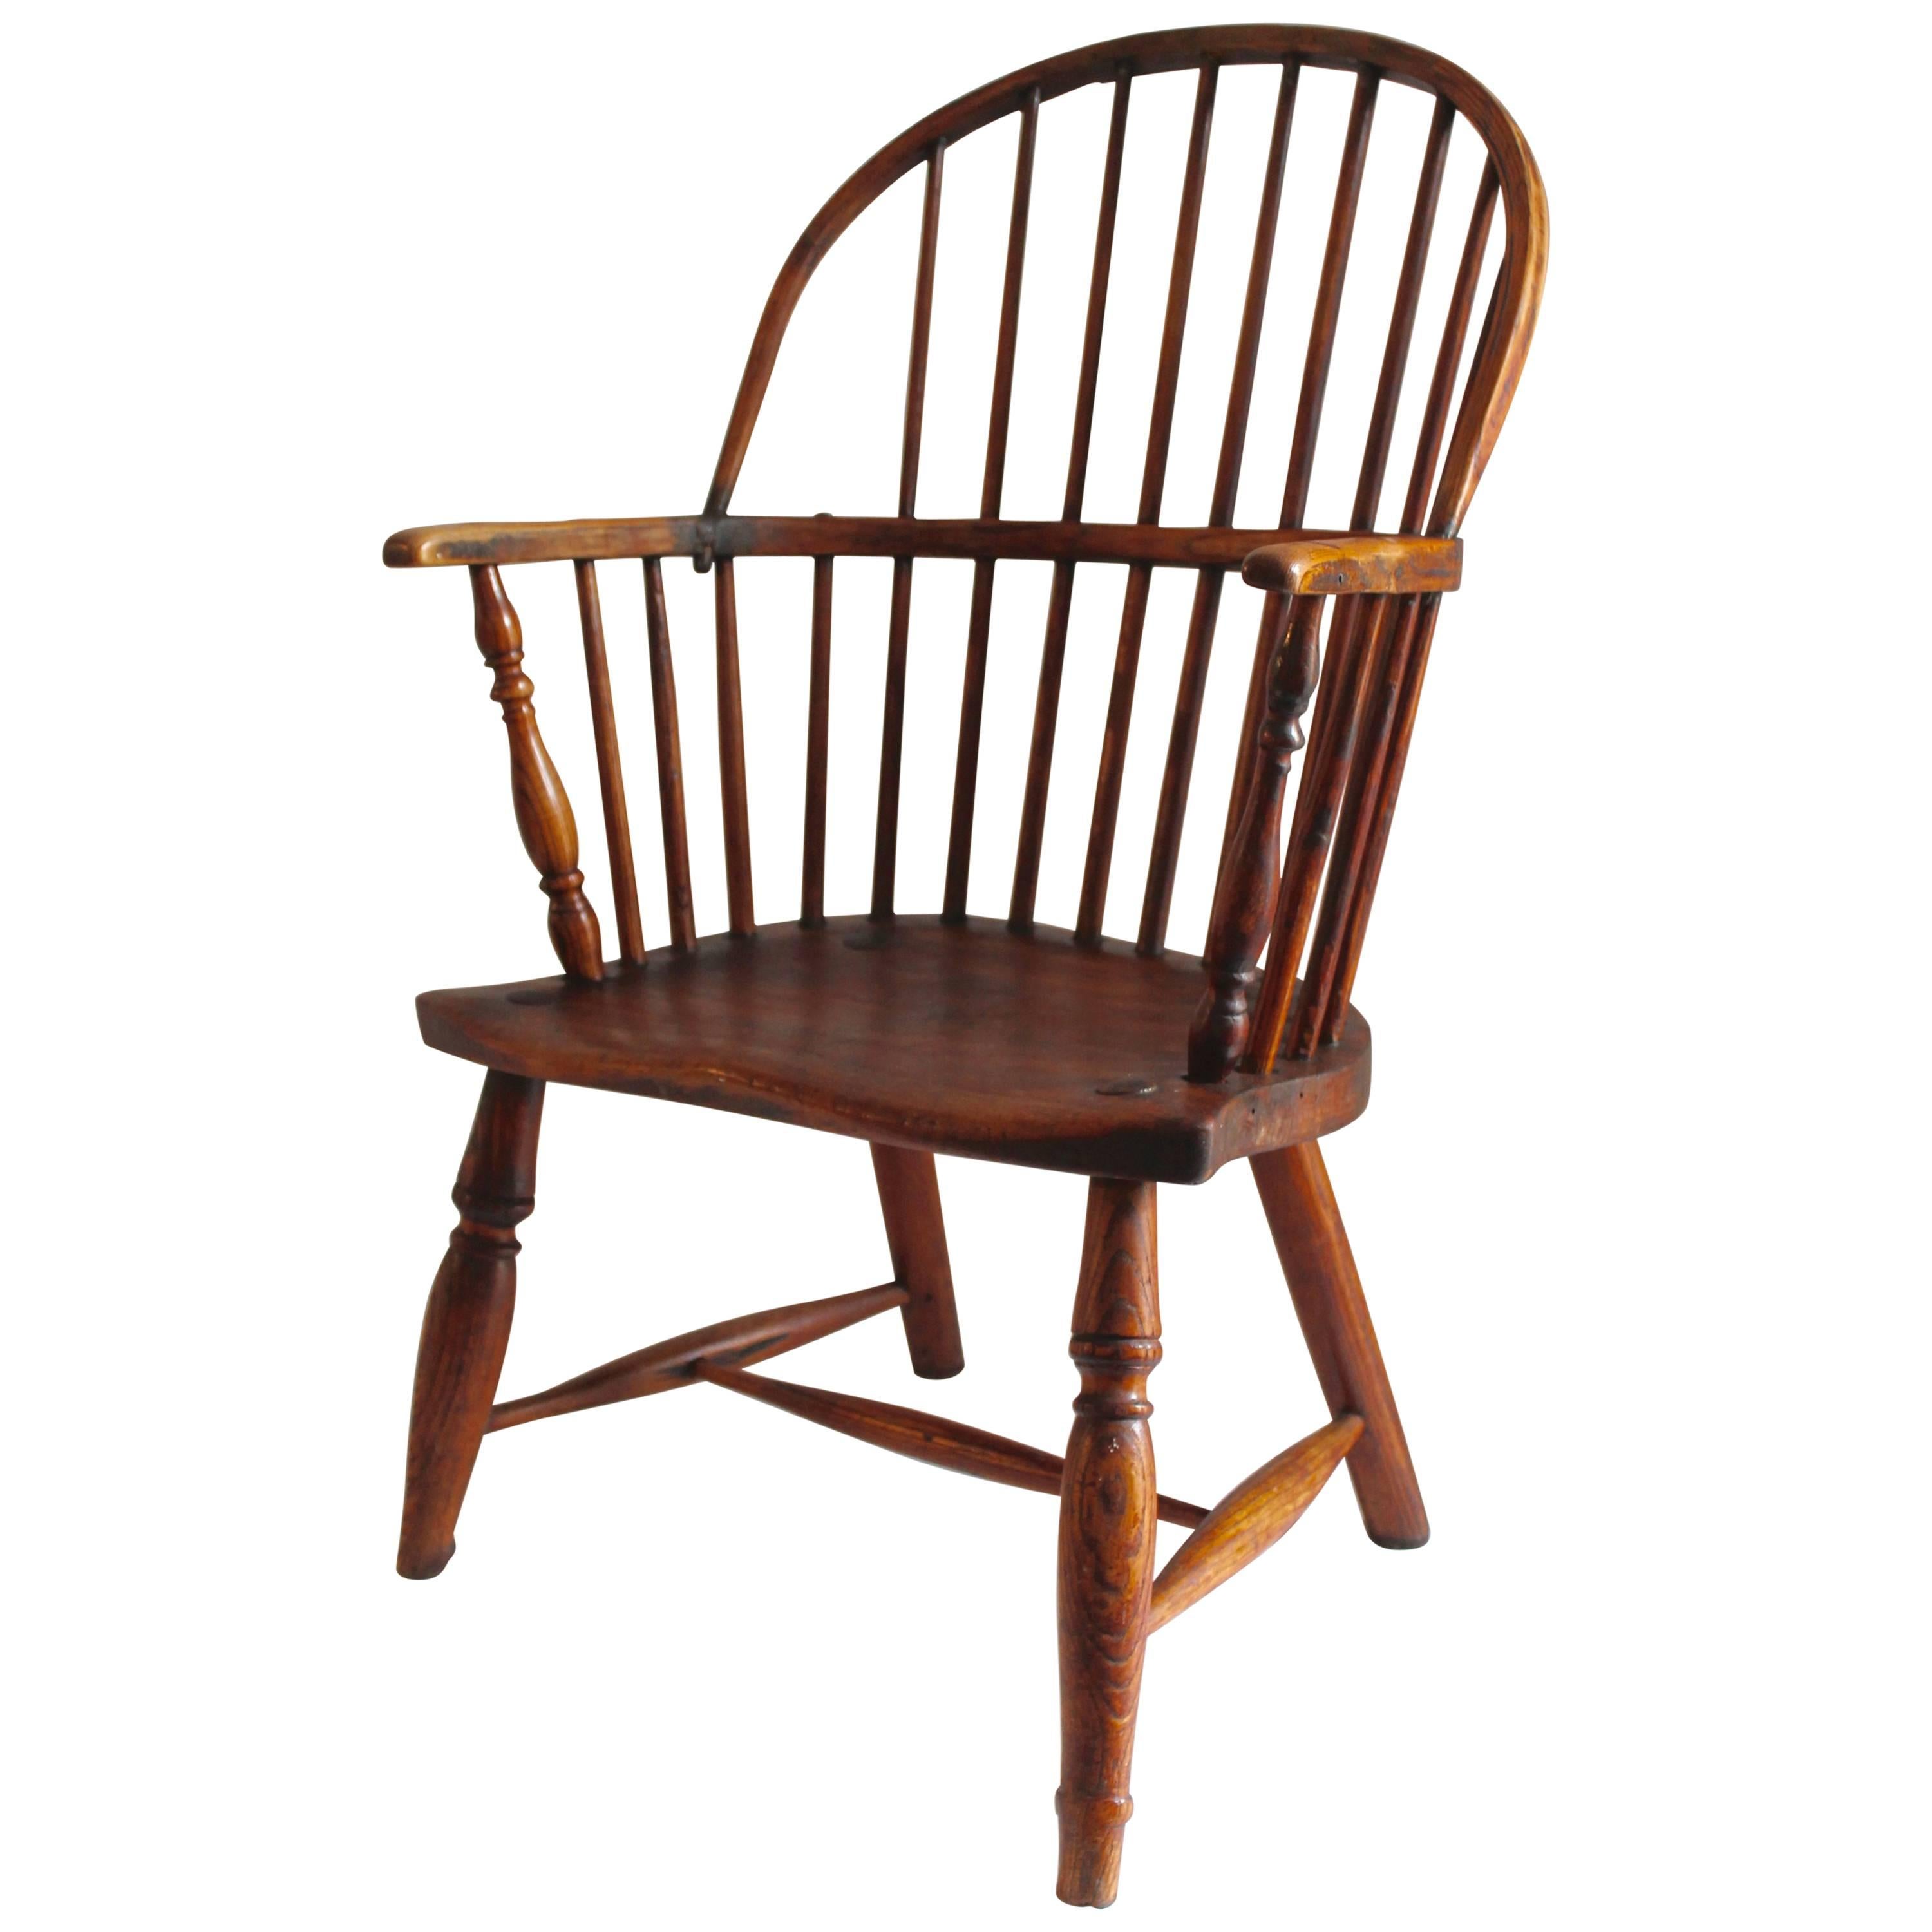 Early 18th Century English Windsor Chair